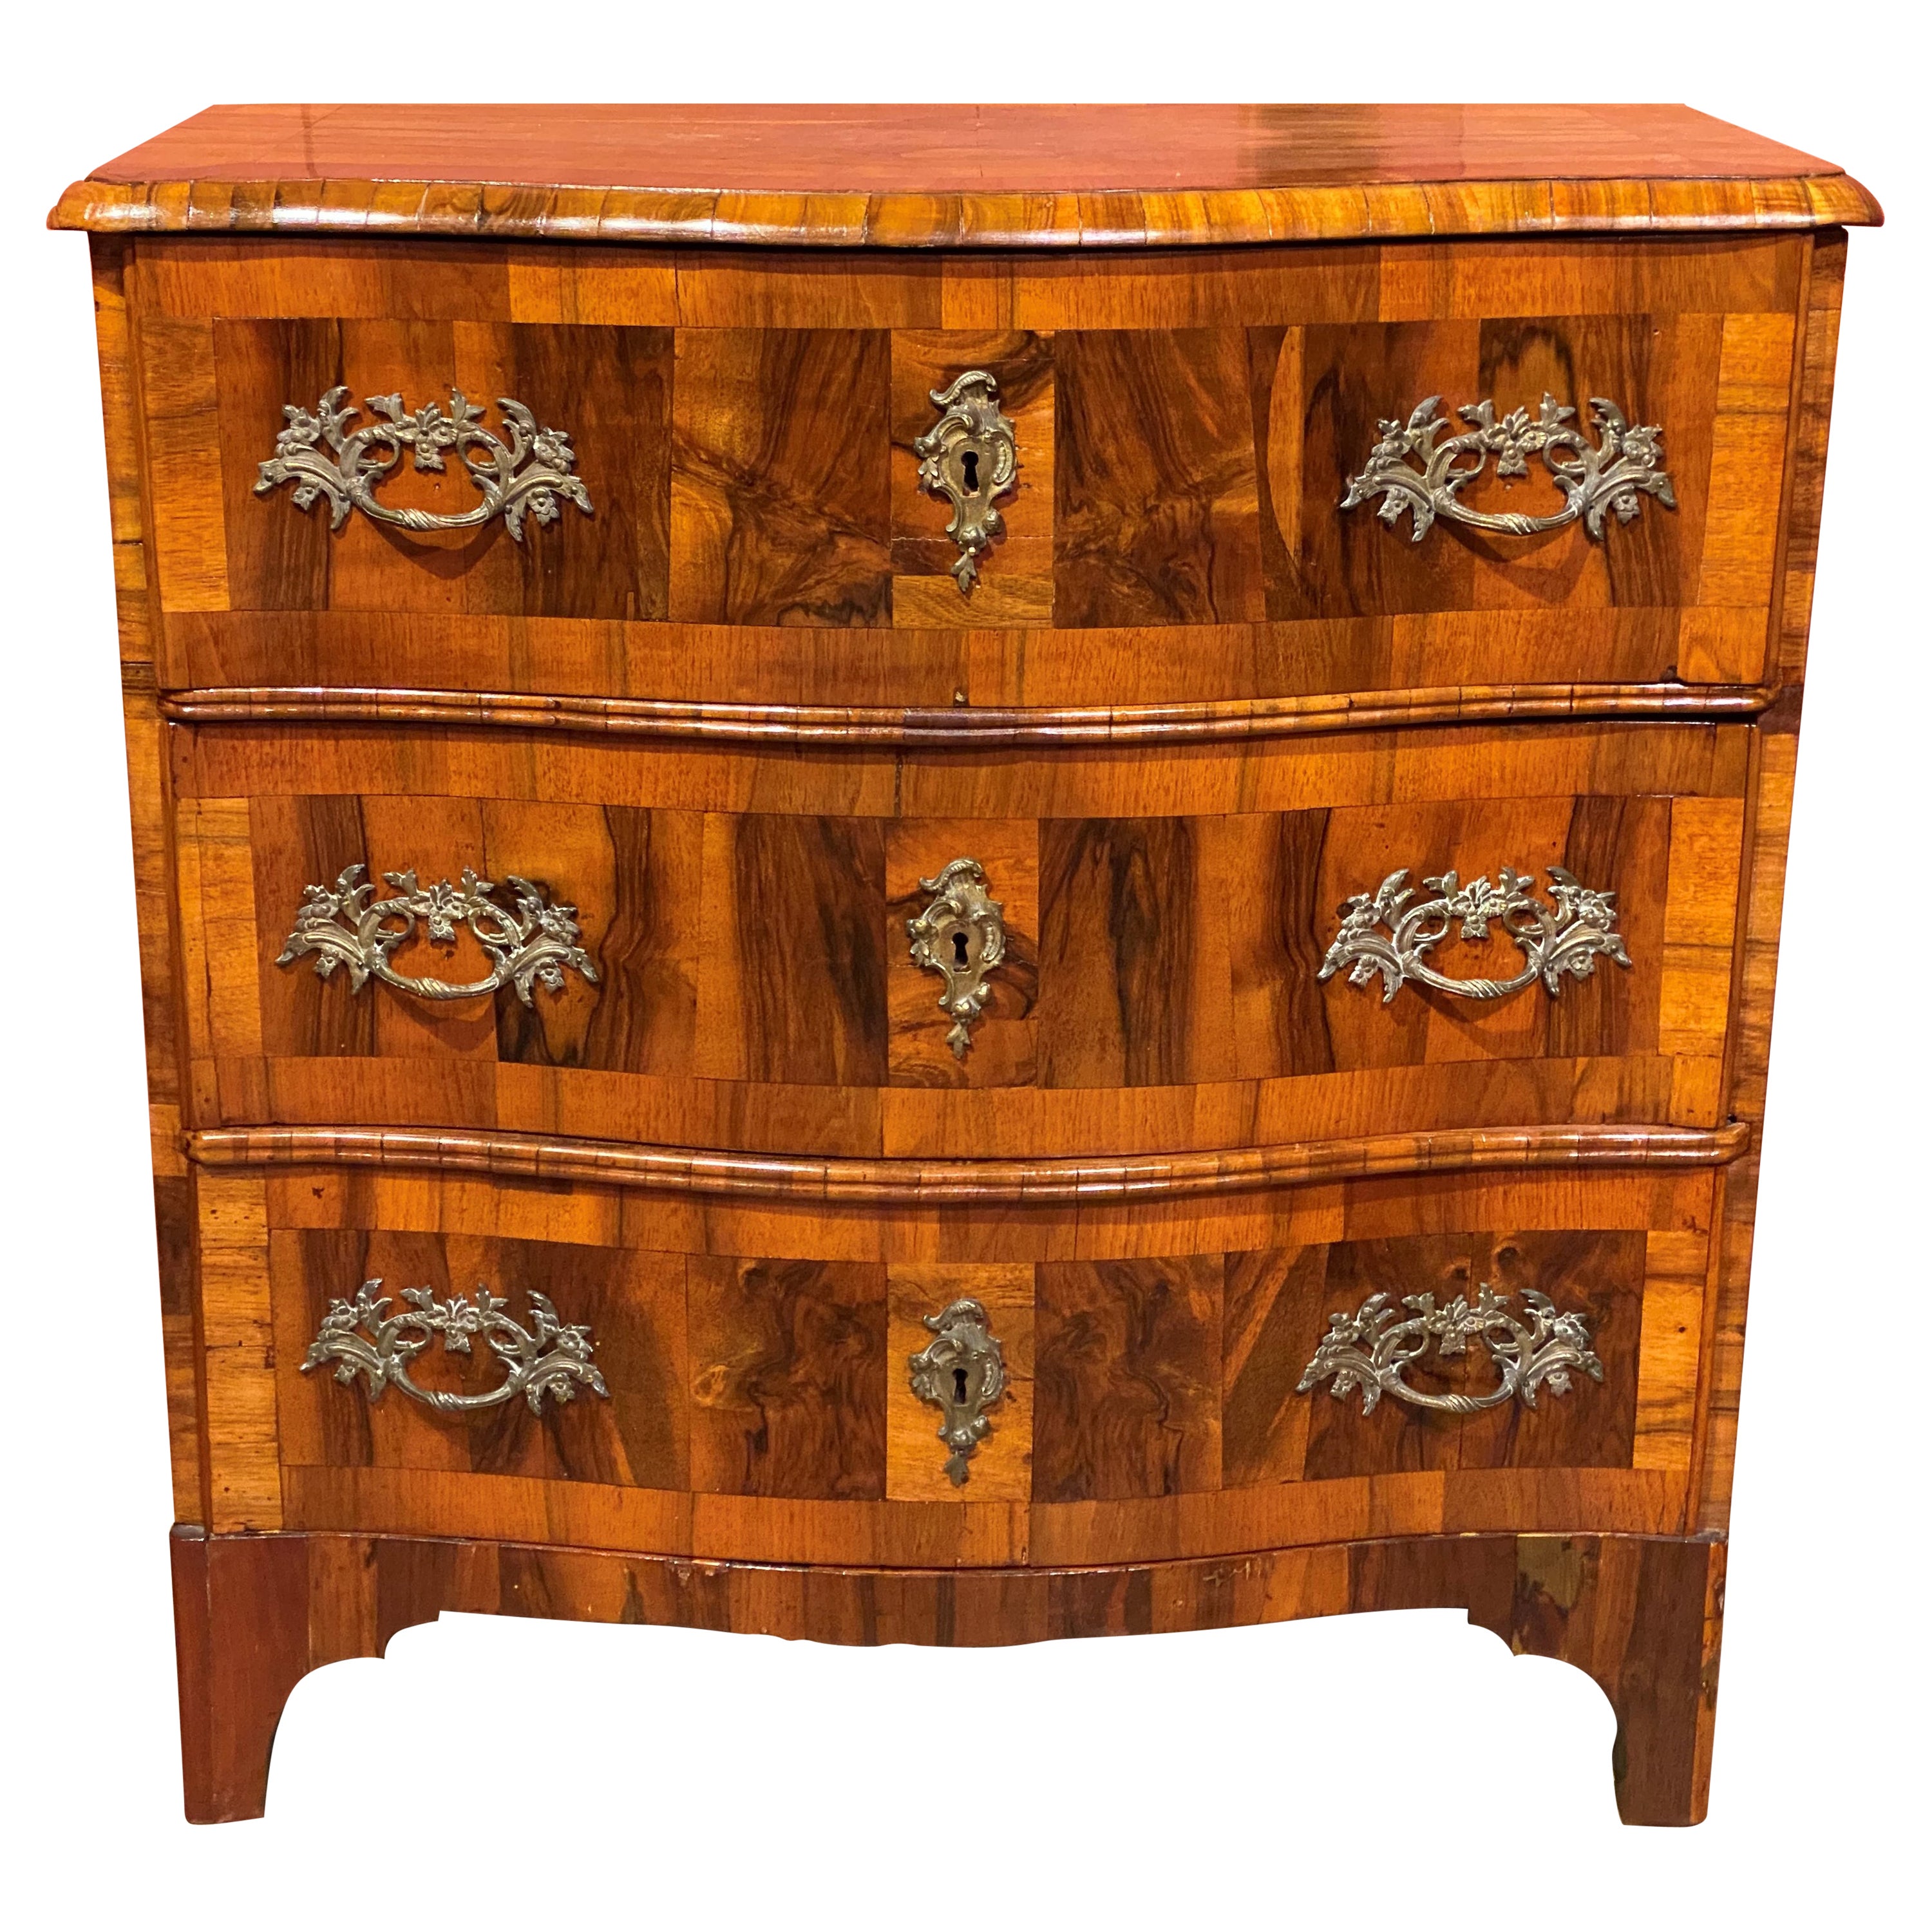 18th C French Walnut 3-Drawer Serpentine Commode with Original Rococo Hardware